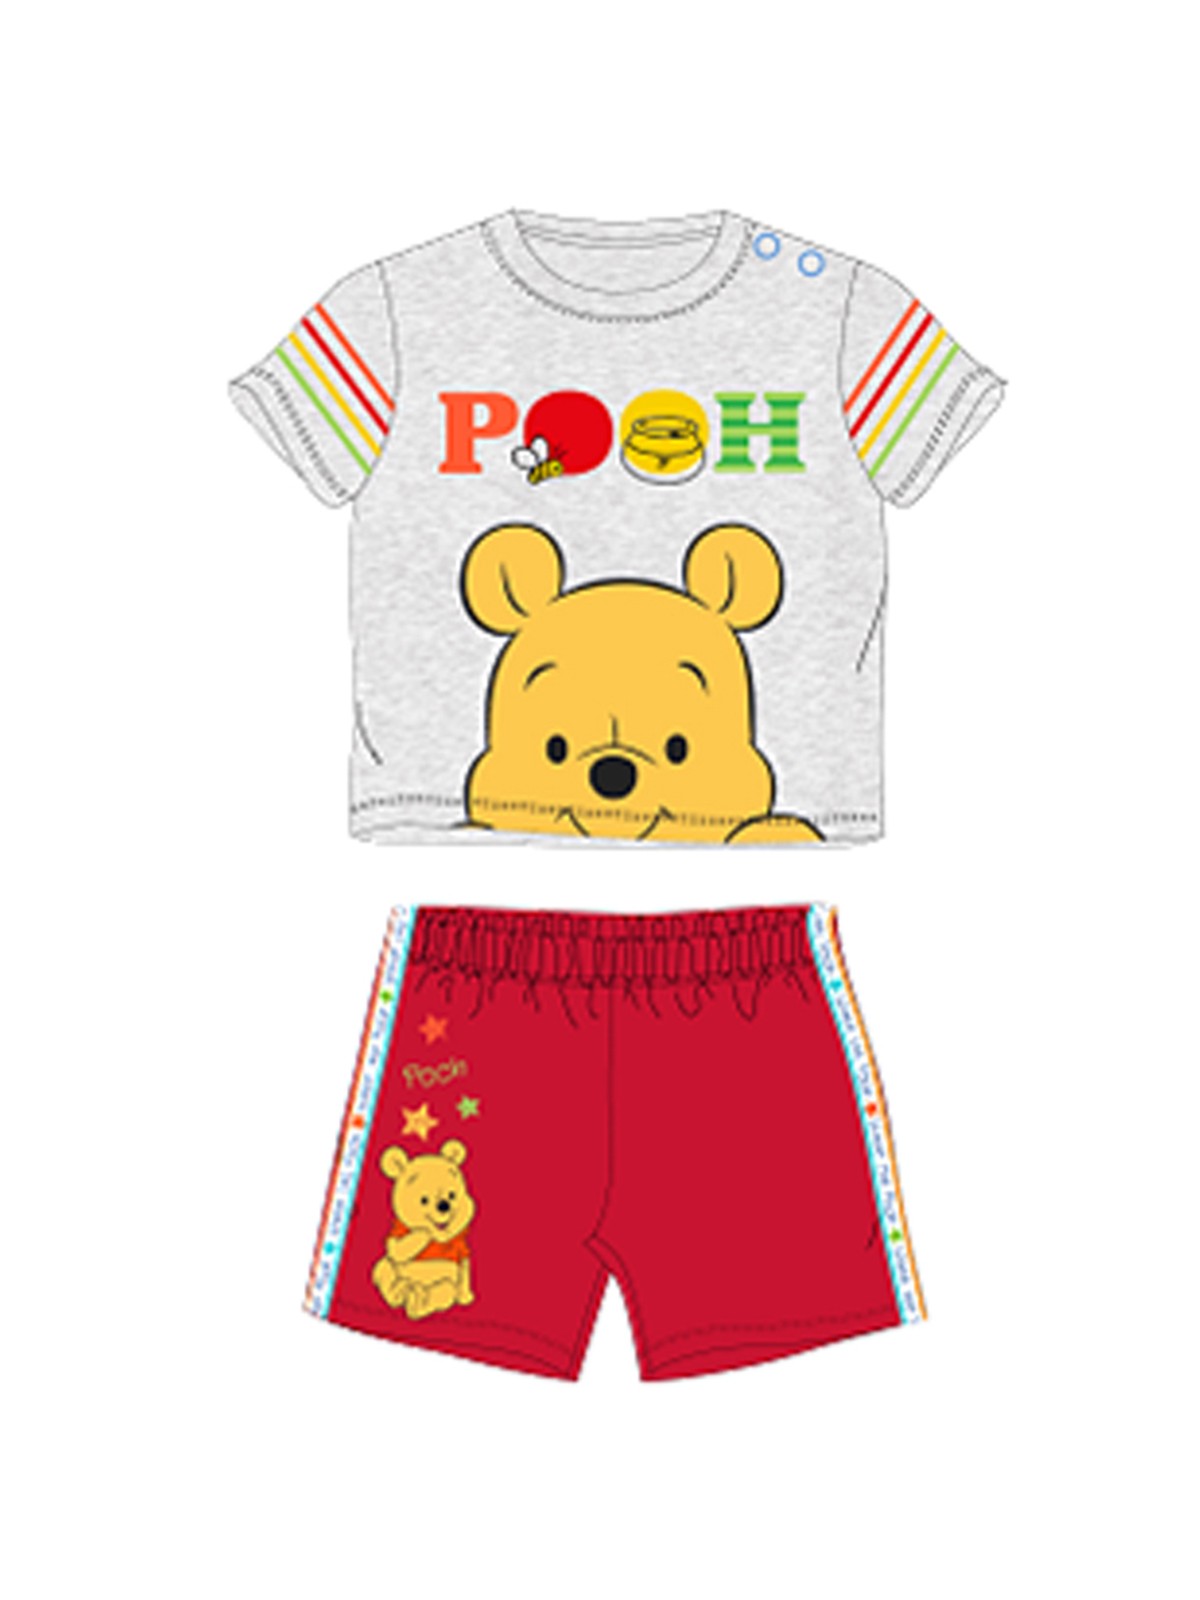 Winnie the Pooh Clothing of 2 pieces